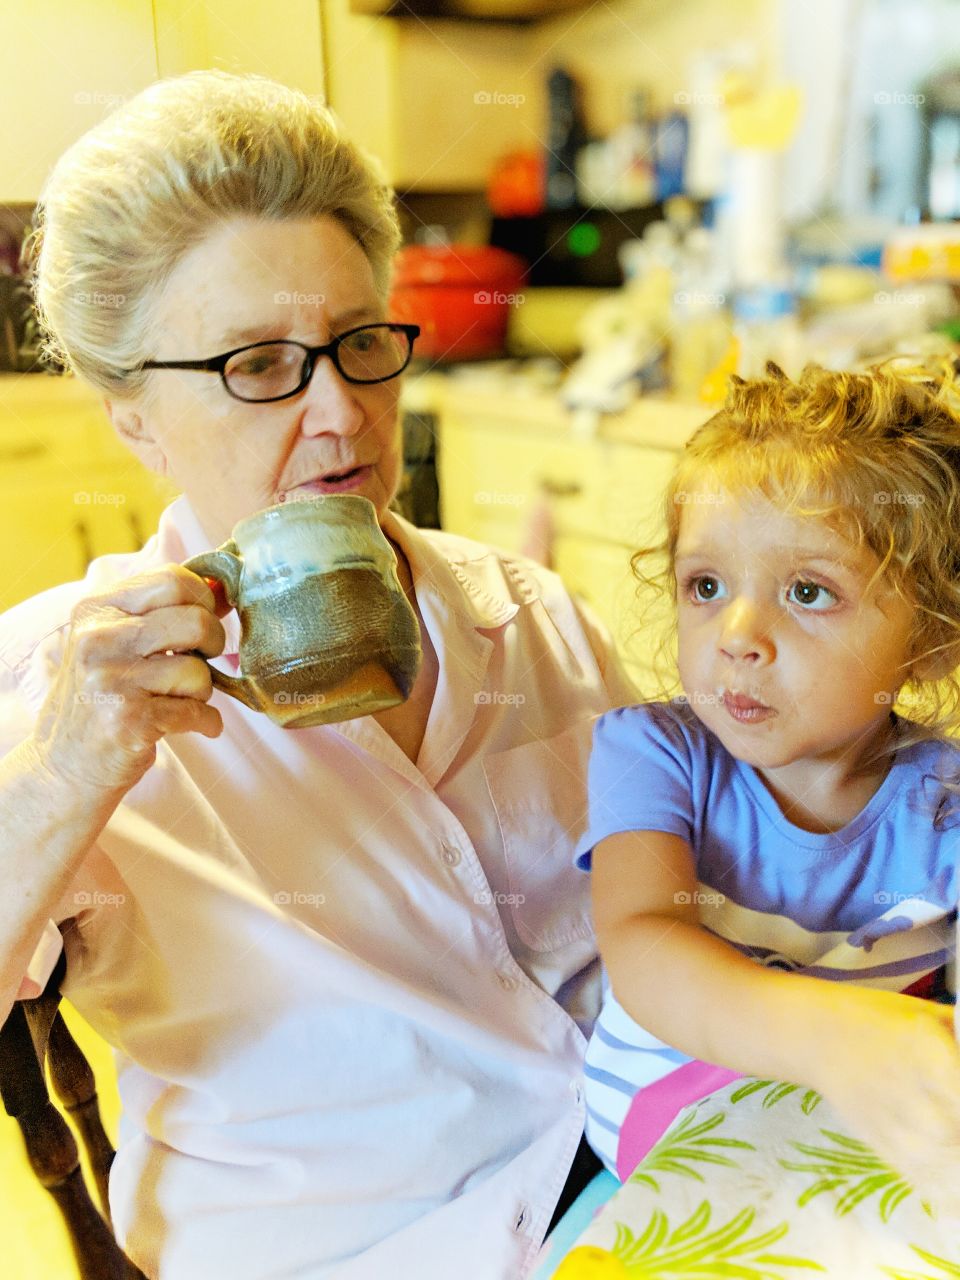 time with Grandma and coffee